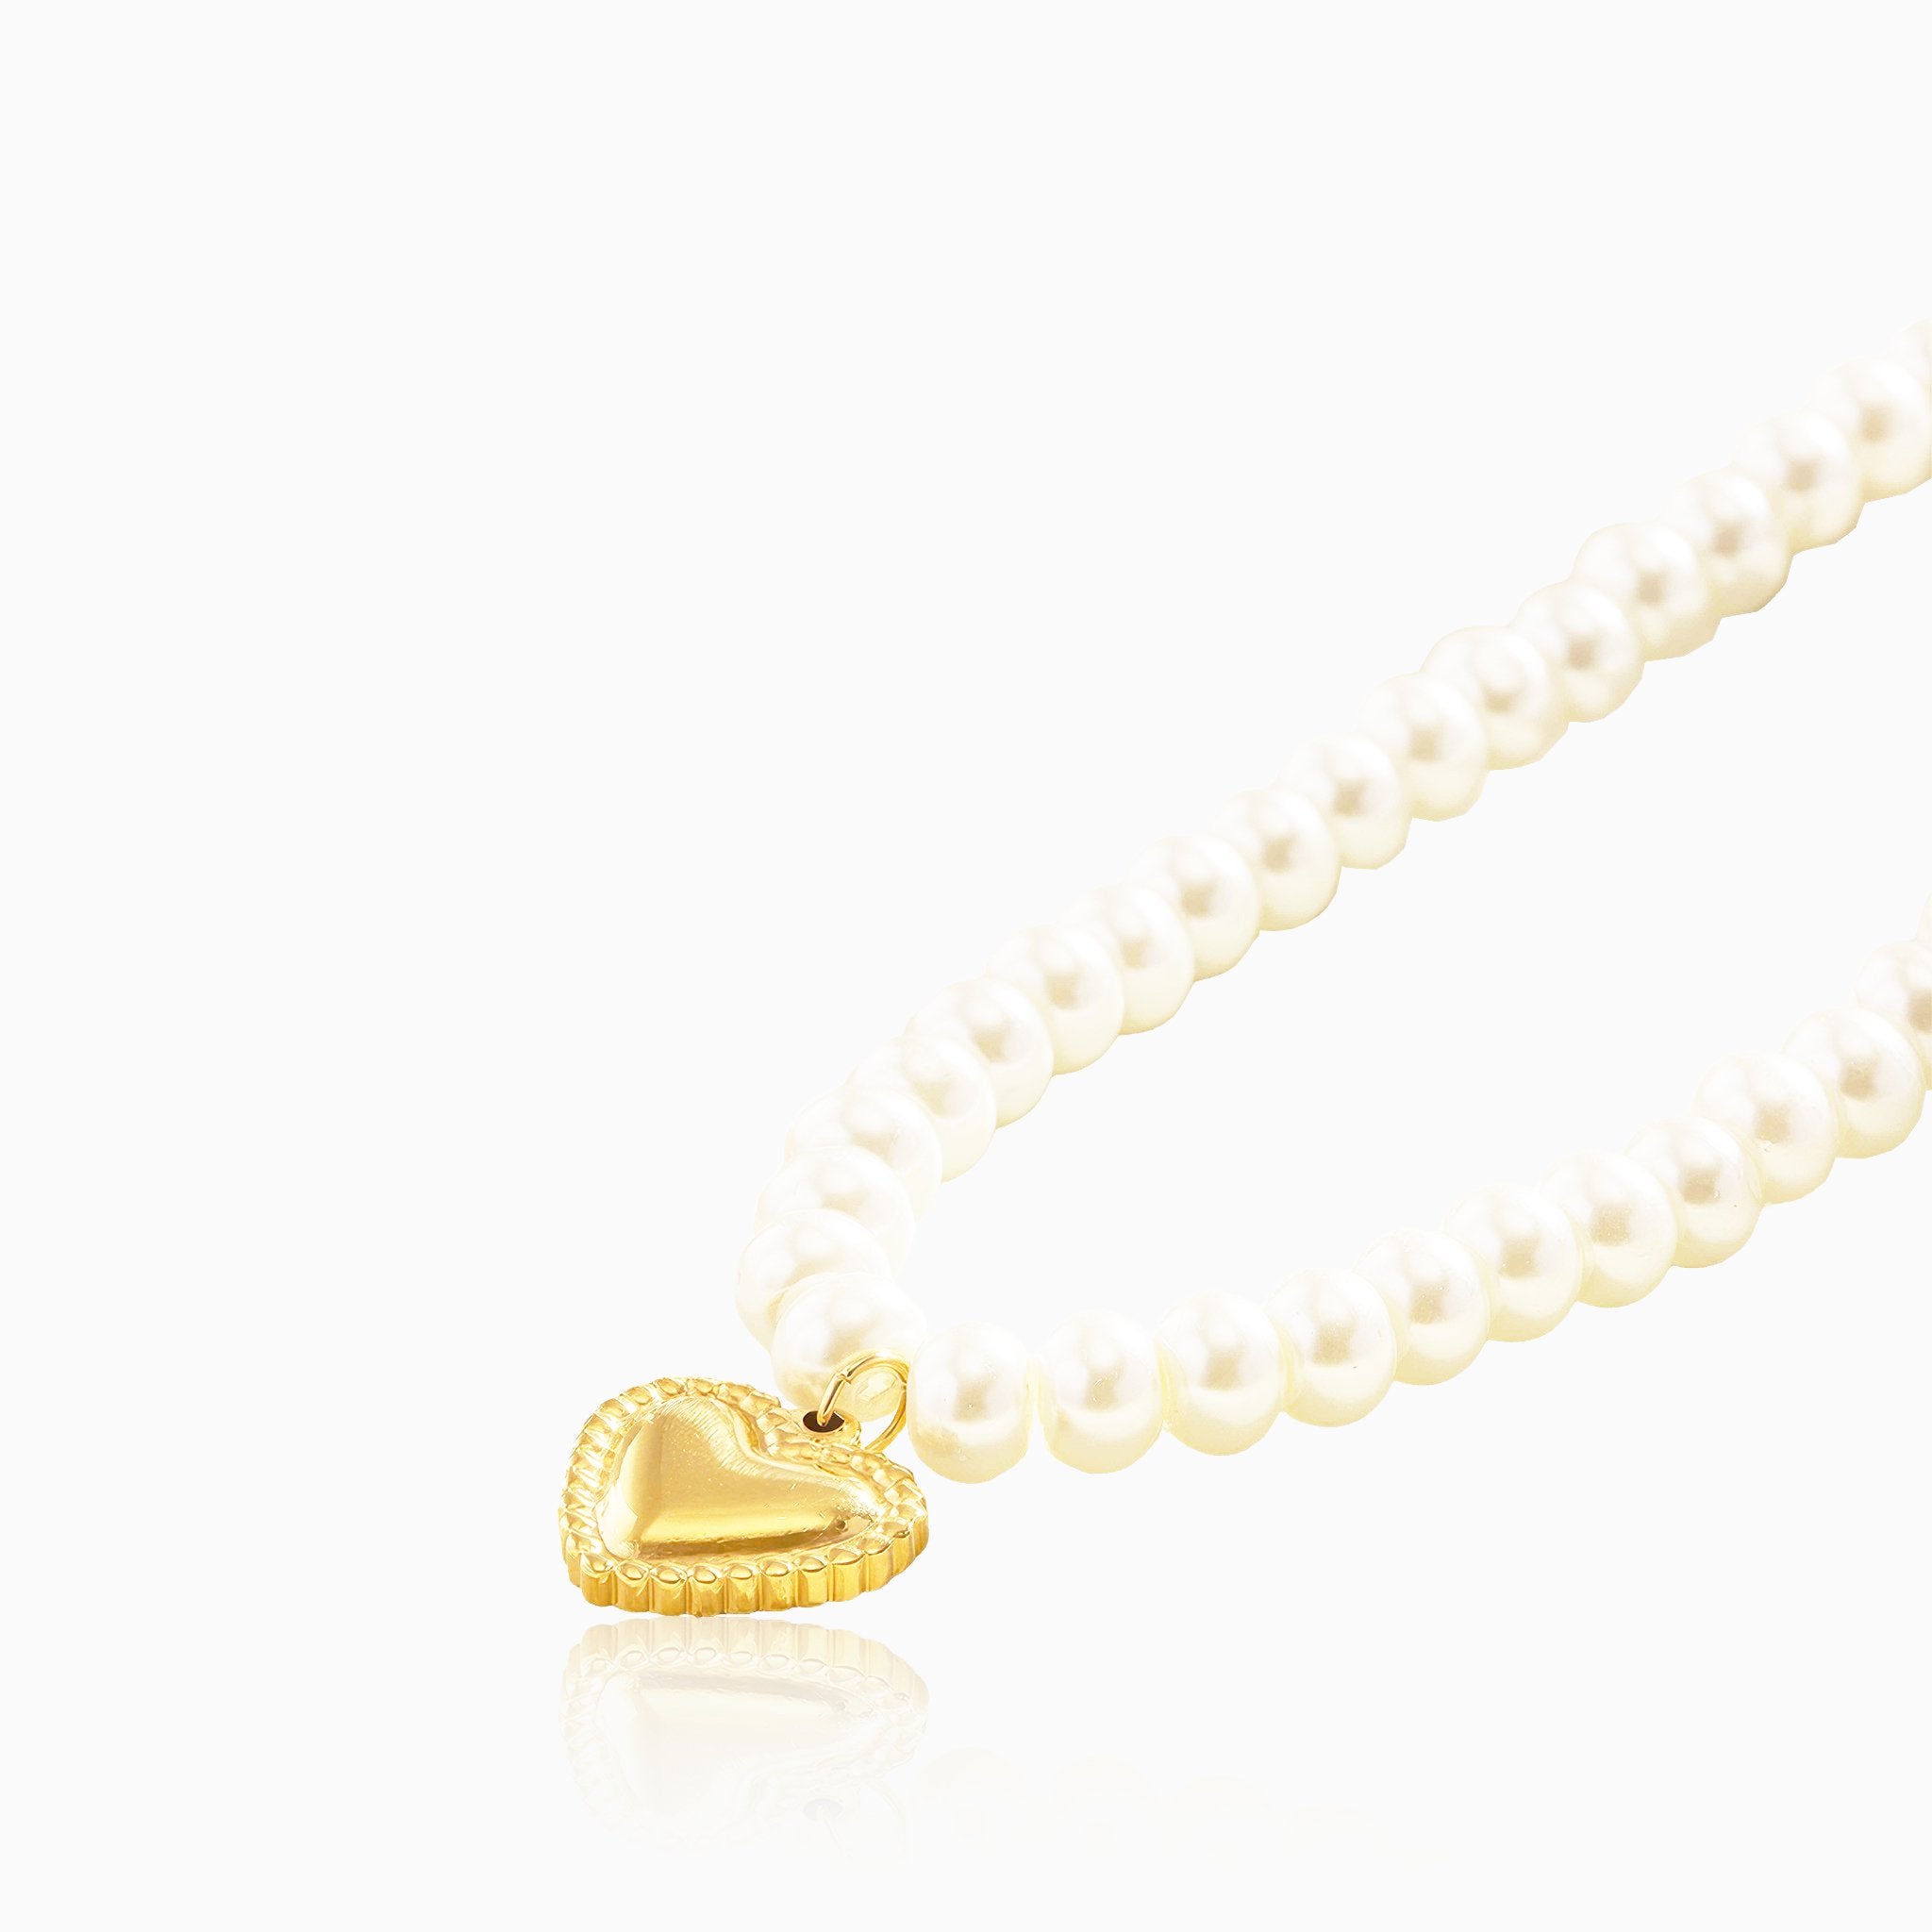 Pearl and Heart Pendant Necklace - Nobbier - Necklace - 18K Gold And Titanium PVD Coated Jewelry